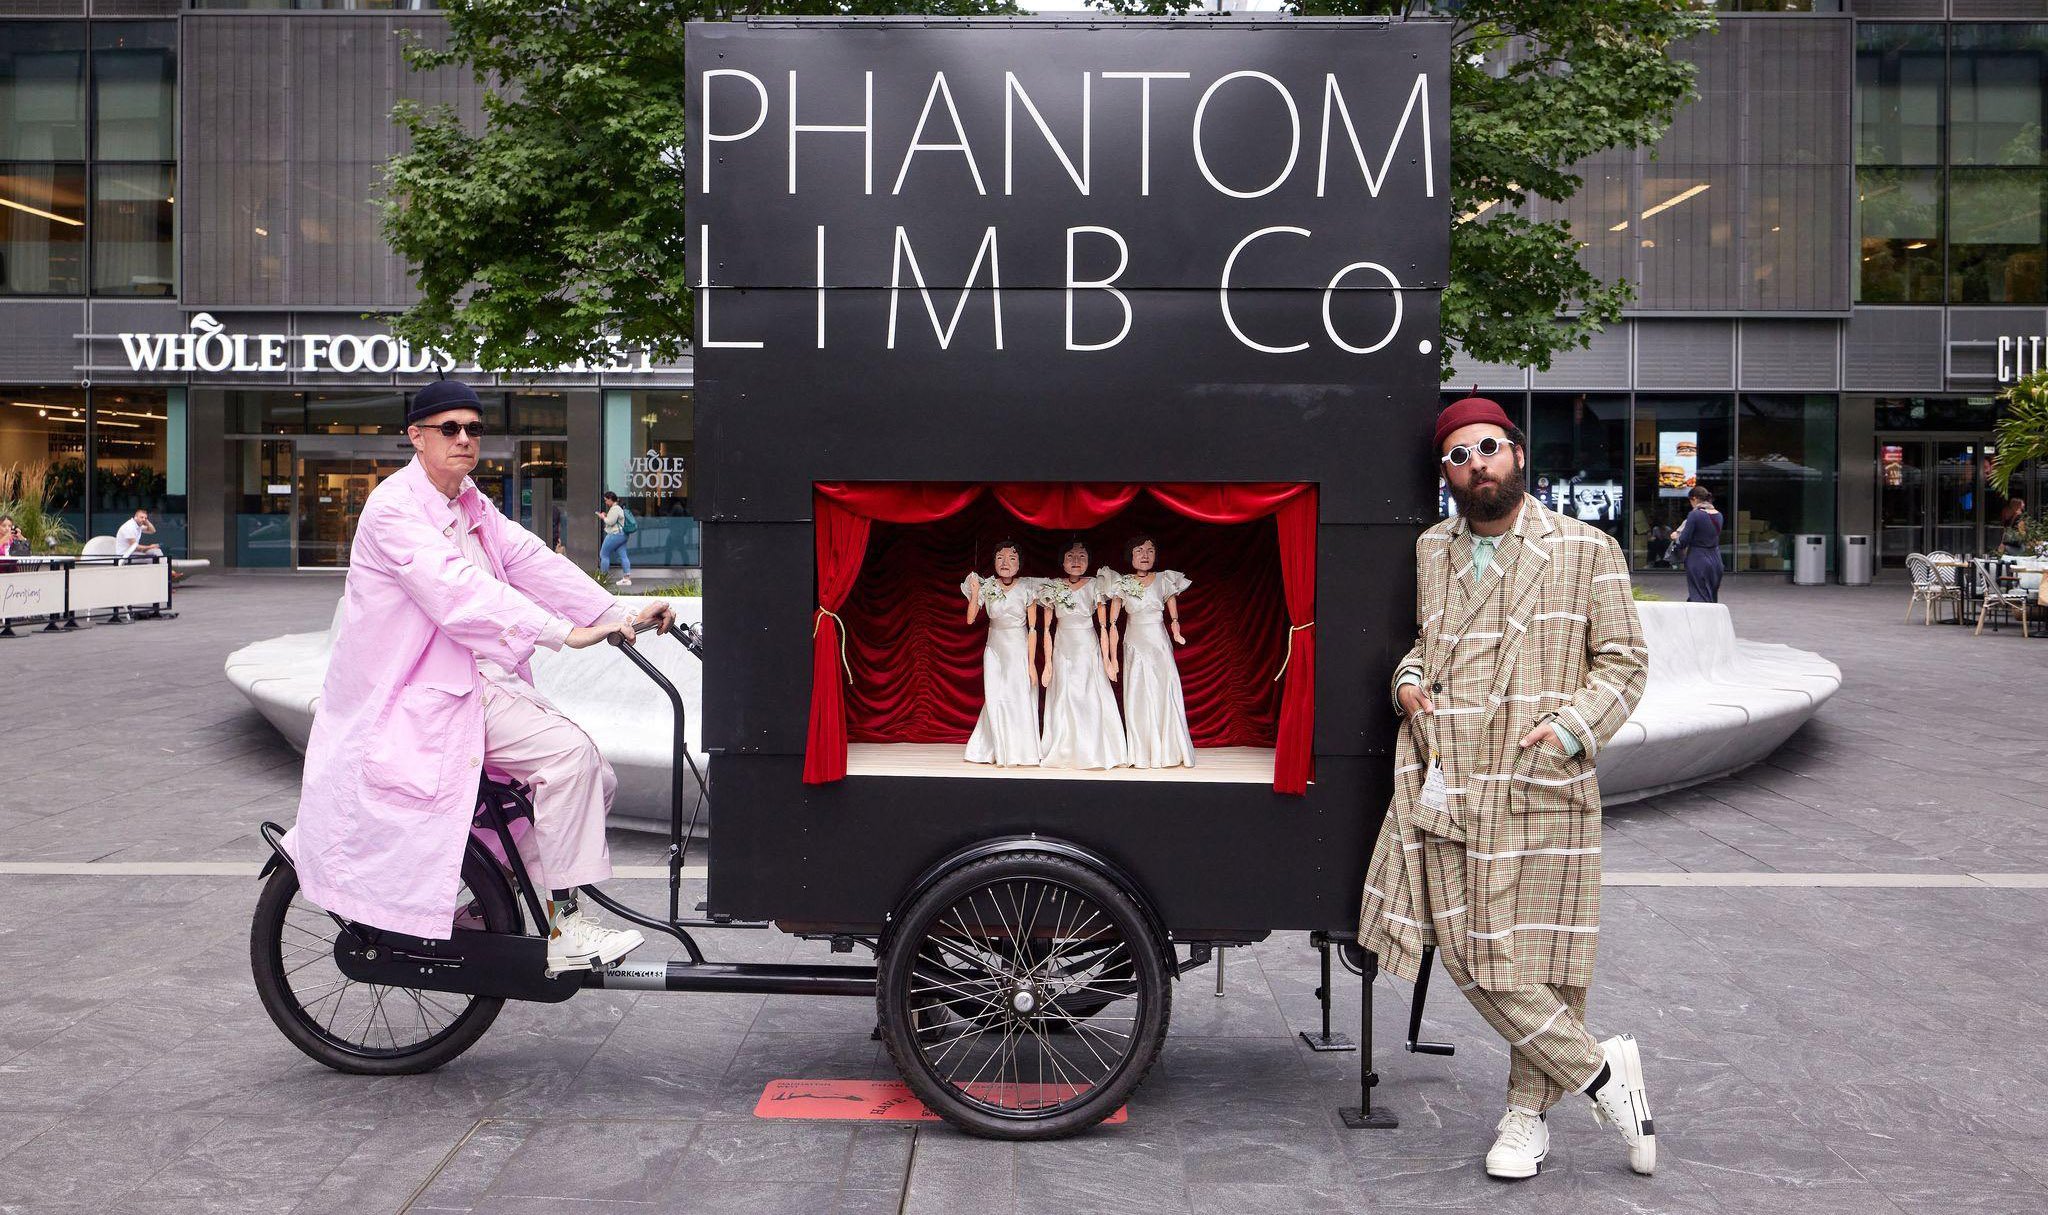 A man posed in a pink trench coat, black beanie, and sunglasses, seated atop cargo bicycle with a large black puppet theatre box on it that says Phantom Limb Co. Another man in a beige plaid suit, red beanie and white sunglasses is leaning against the structure, in the middle of an urban plaza surrounded by people, trees, and buildings.